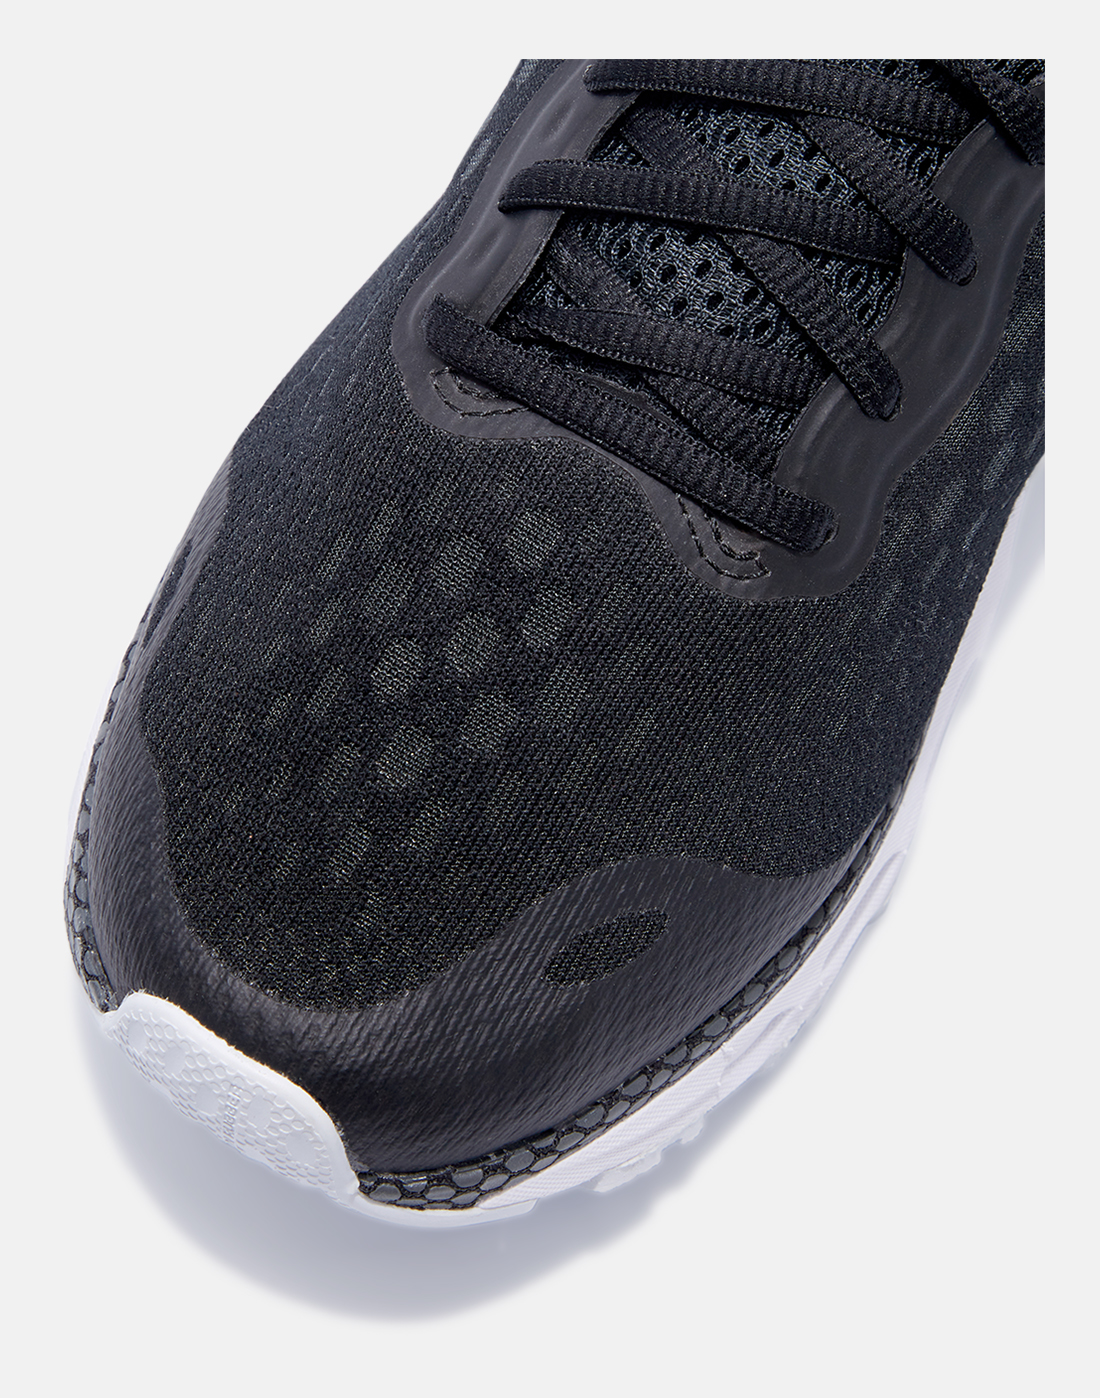 Under Armour Mens HOVR Infinite 3 - Black | Life Style Sports IE